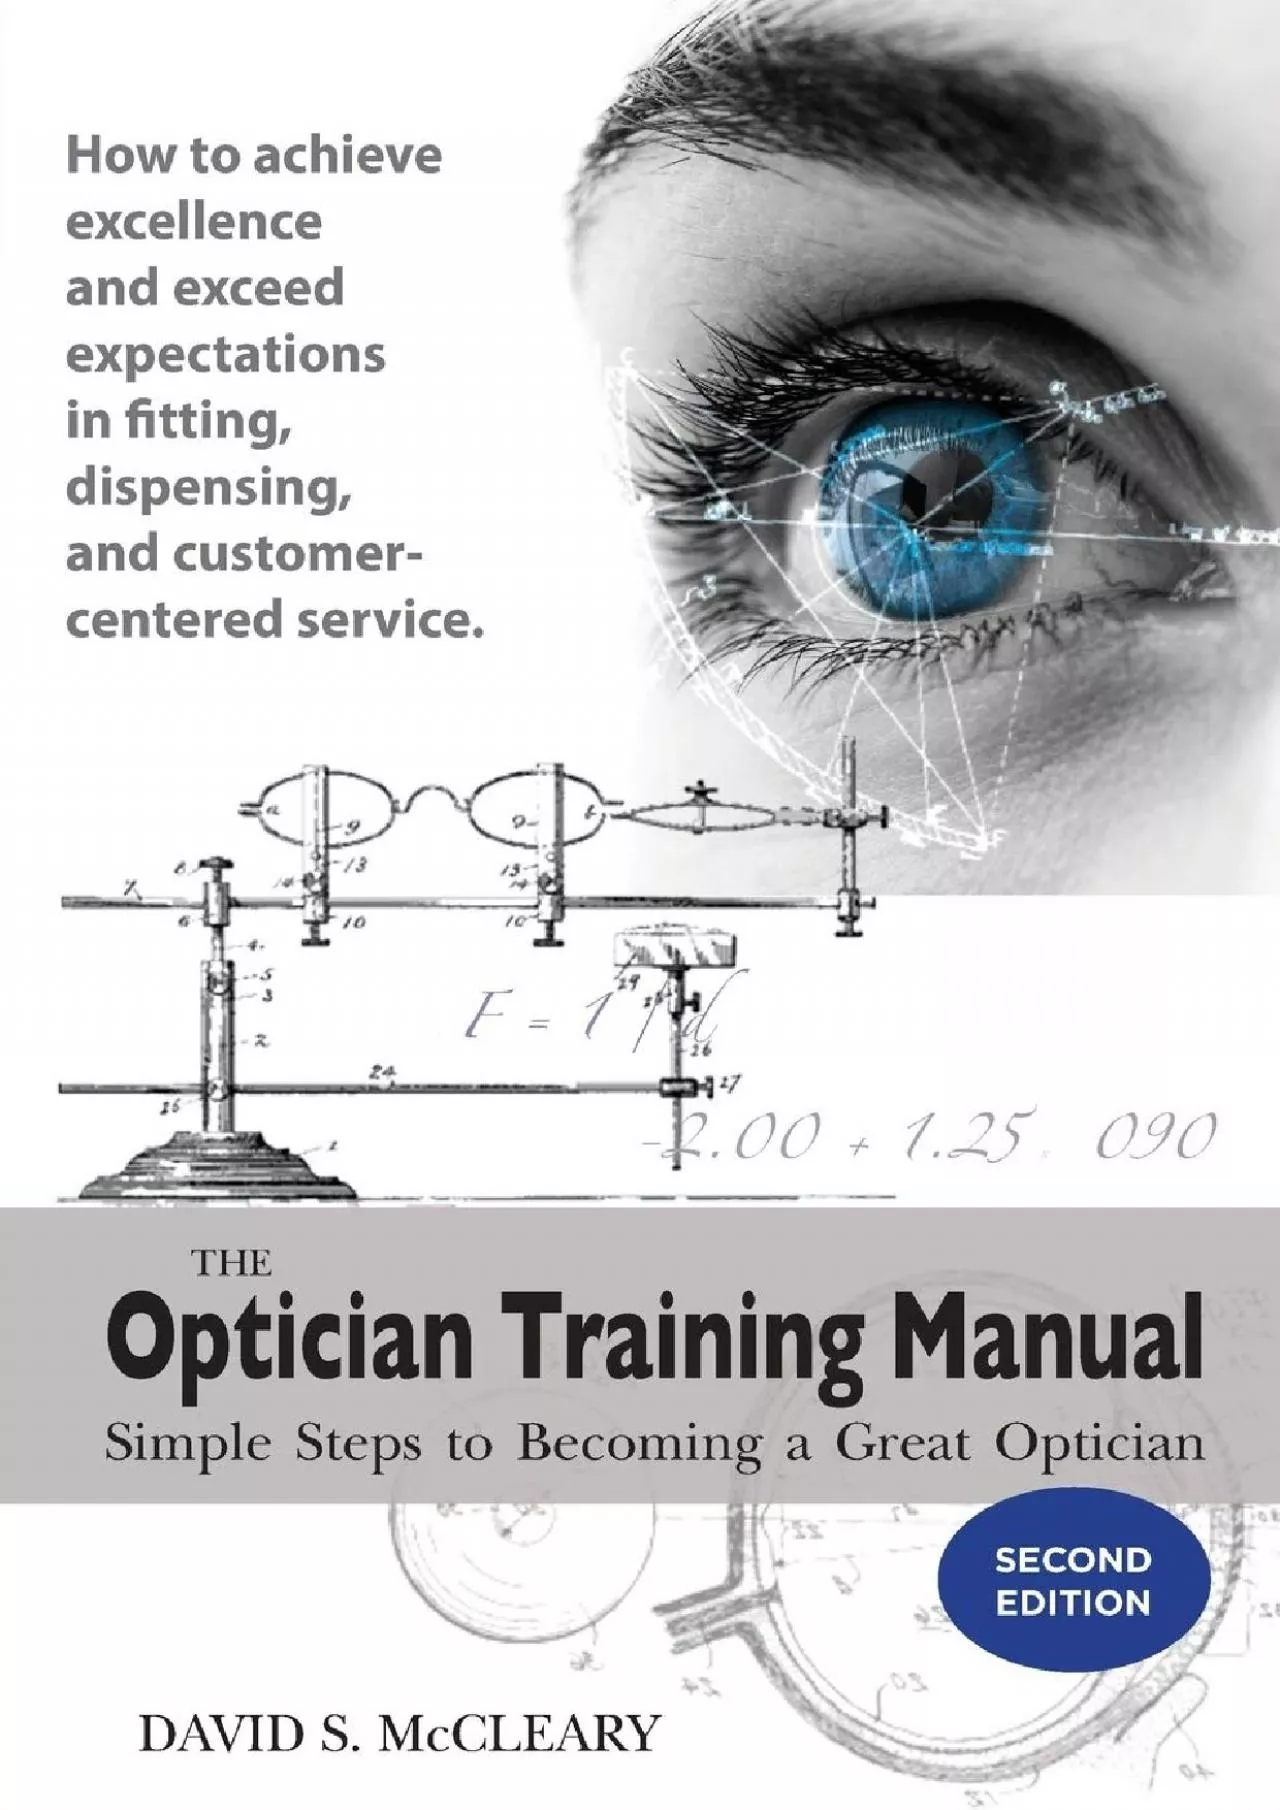 [DOWNLOAD] The Optician Training Manual - 2nd Edition: Simple Steps To Becoming A Great